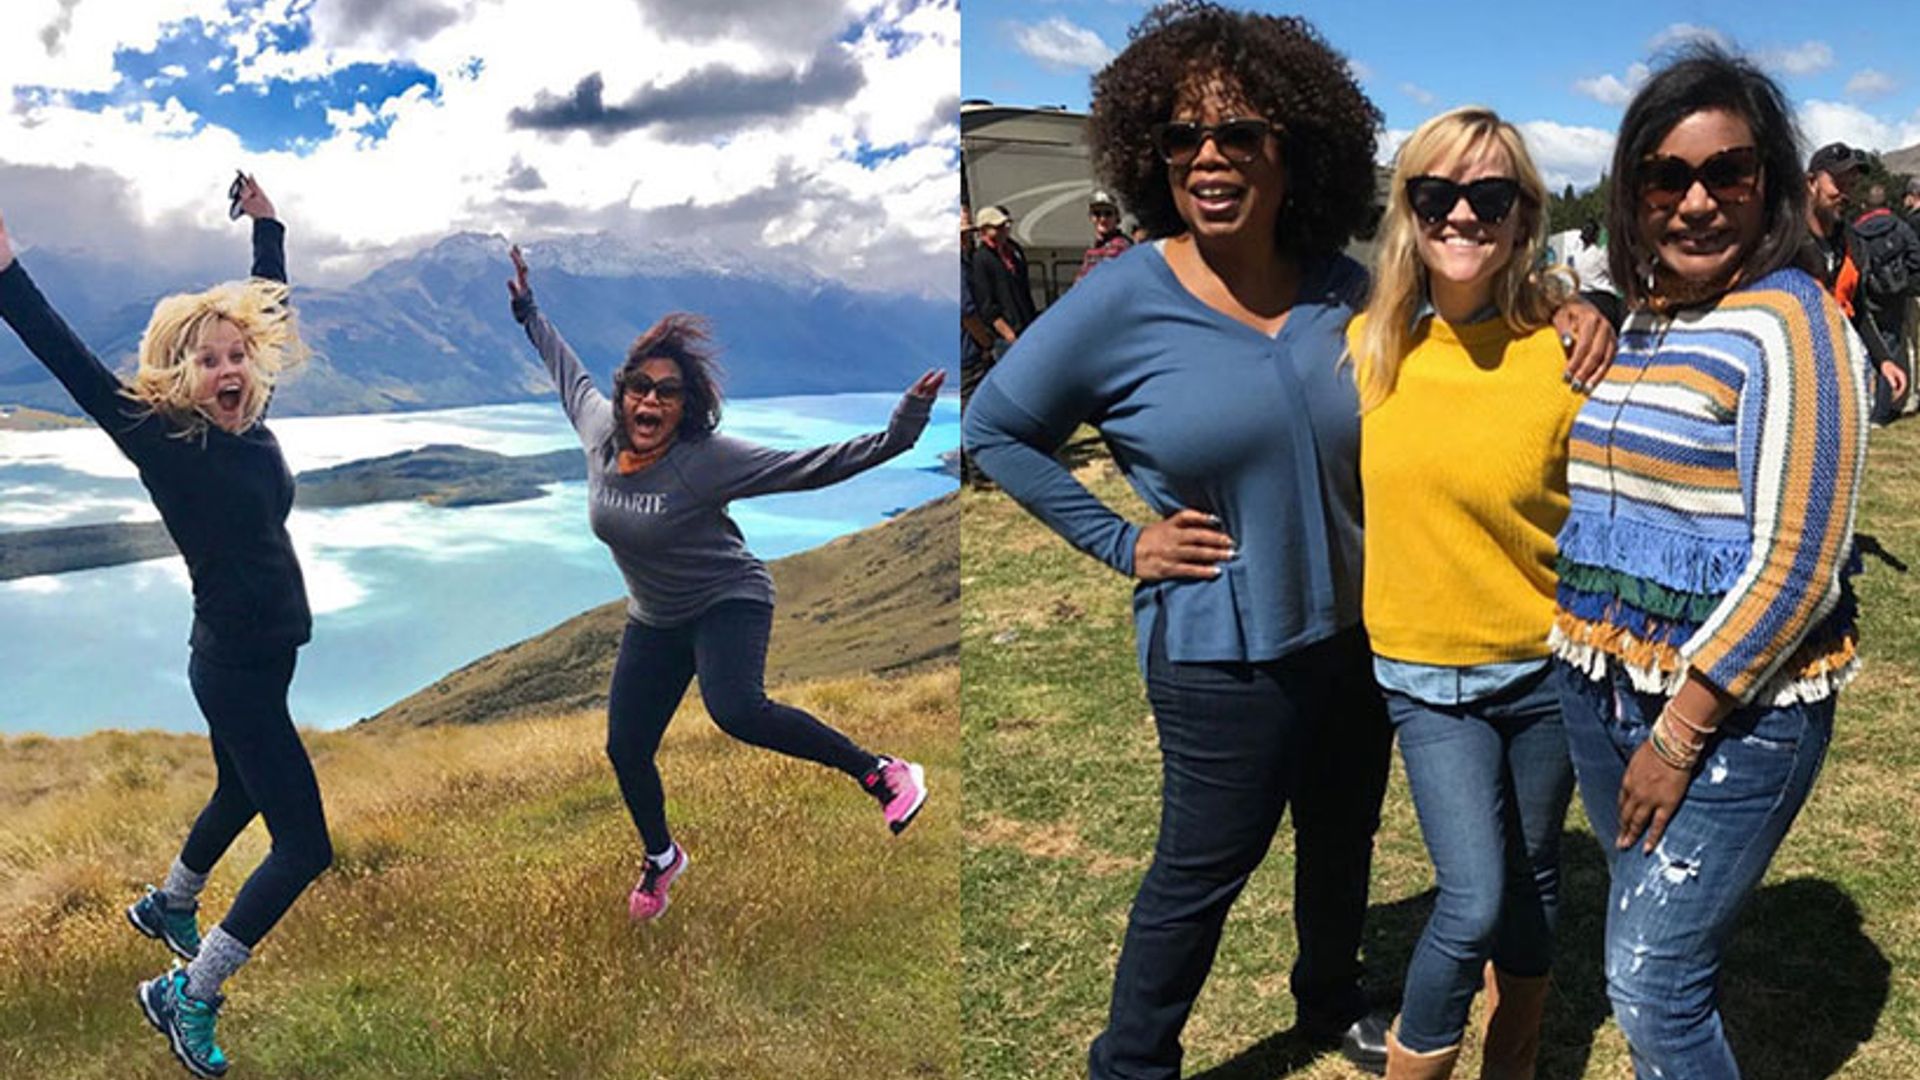 Reese Witherspoon, Oprah and Mindy Kaling's New Zealand trip is giving us major wanderlust